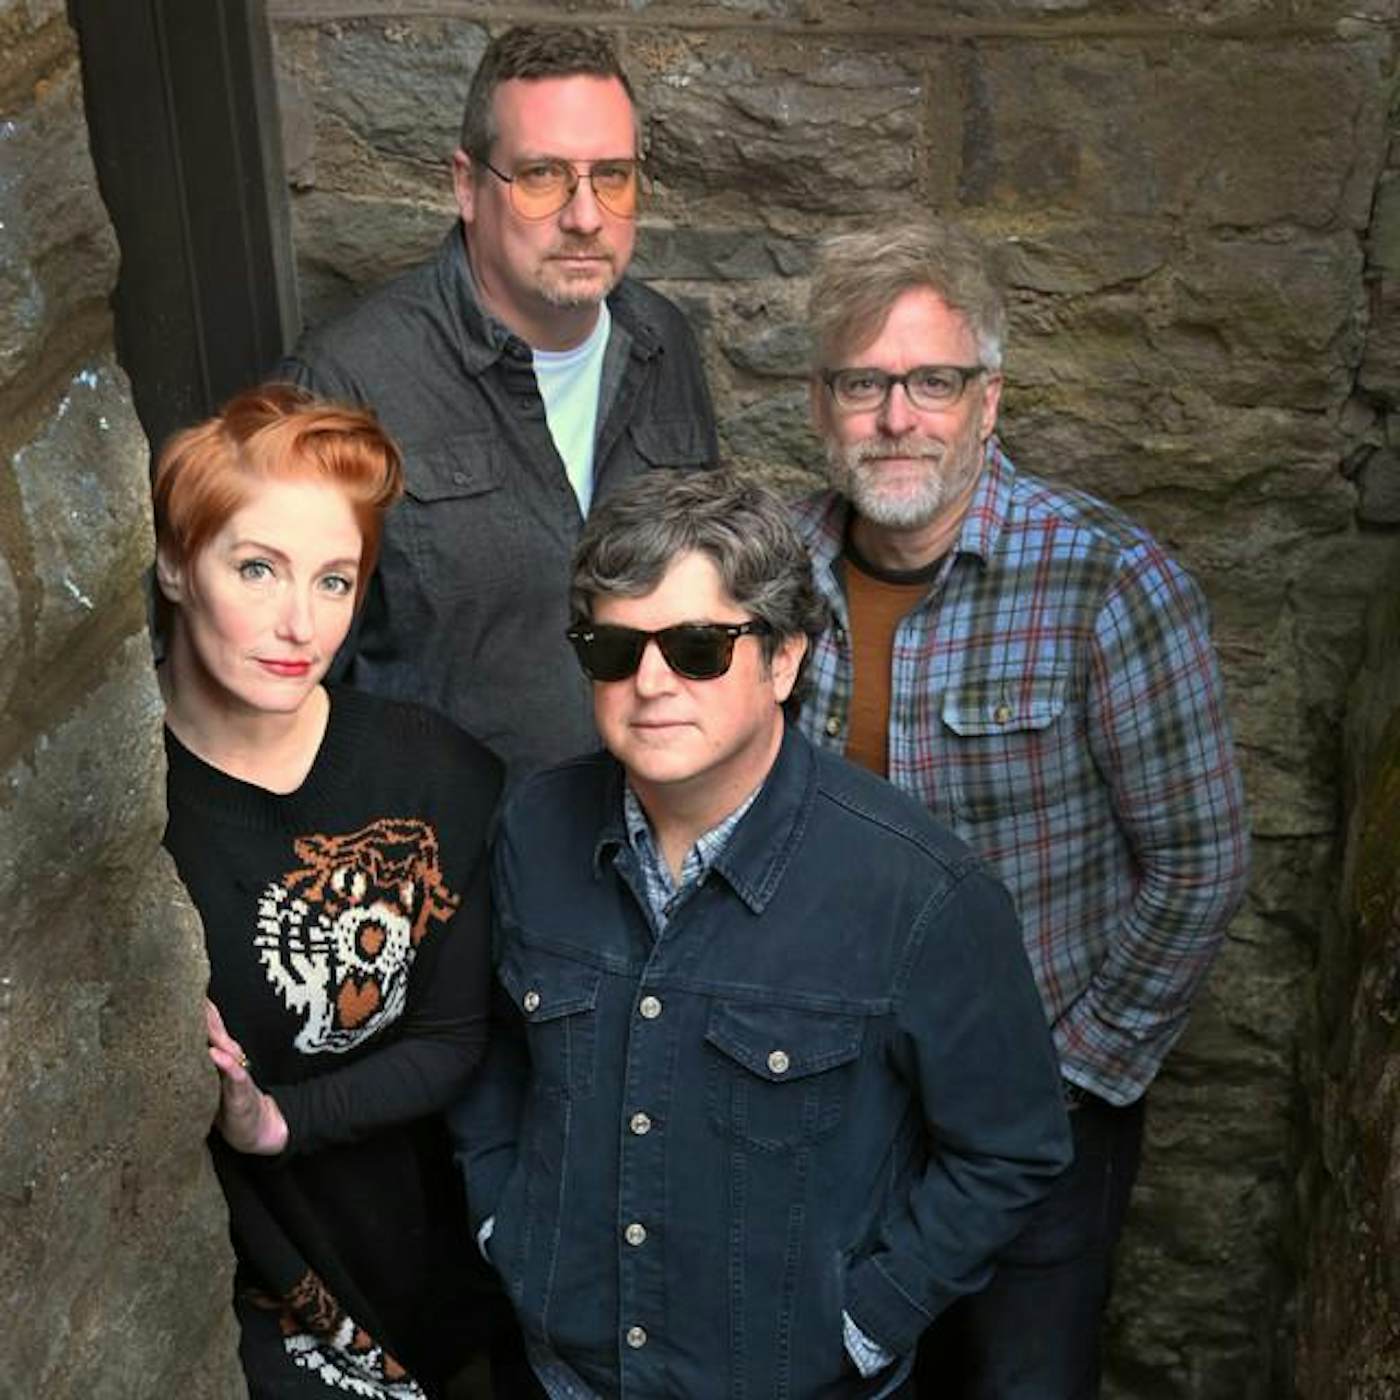 Sixpence None The Richer